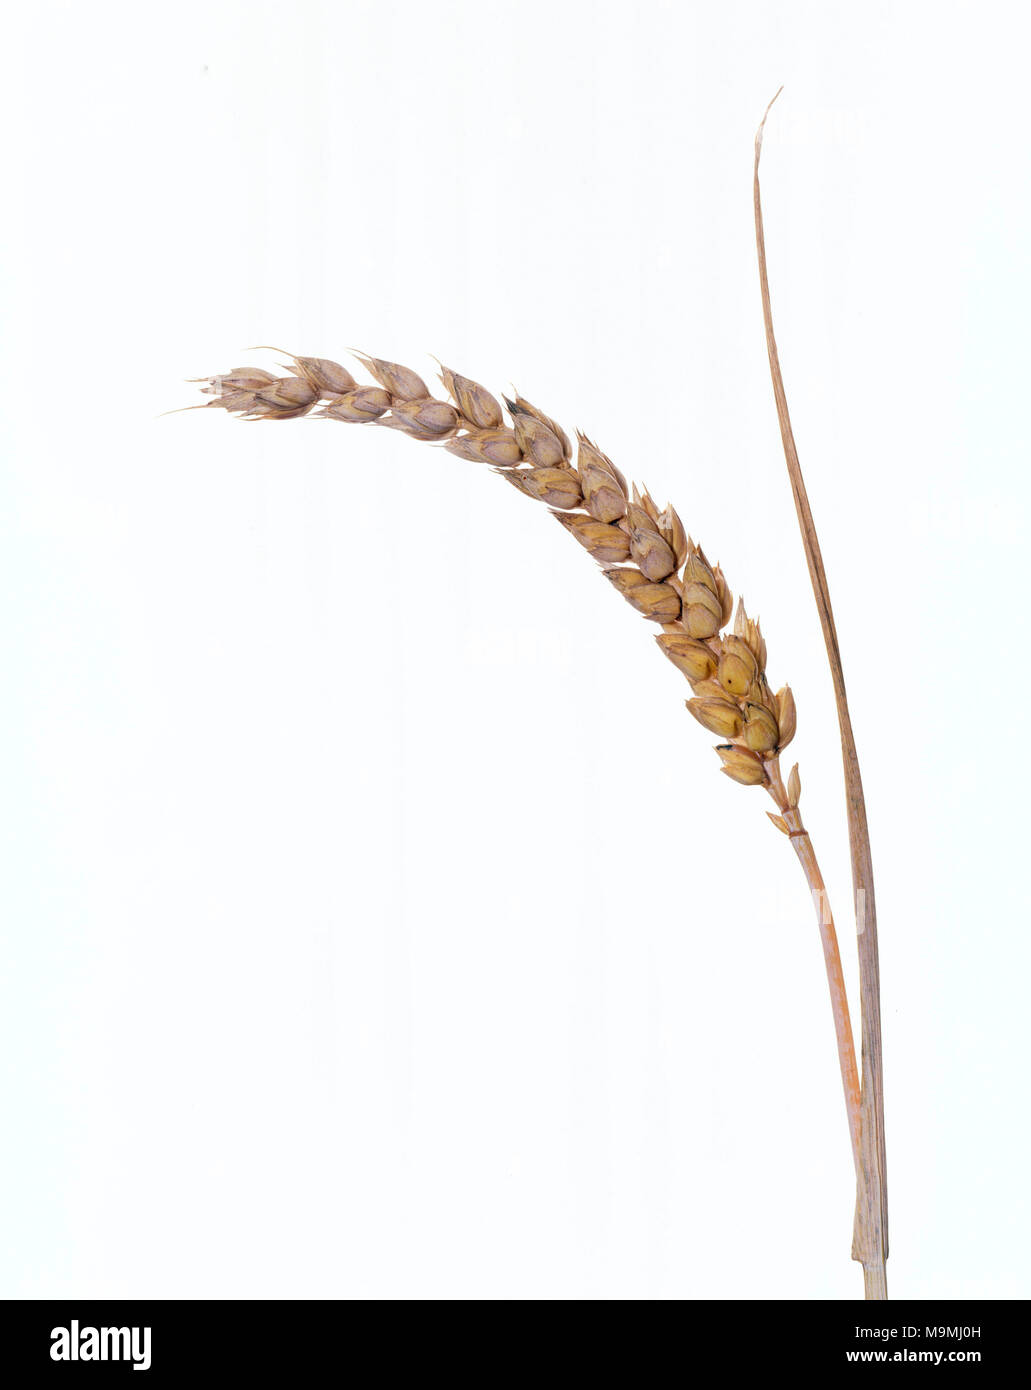 Common Wheat, Bread Wheat (Triticum aestivum), ripe ear. Studio picture against a whote background. Germany Stock Photo